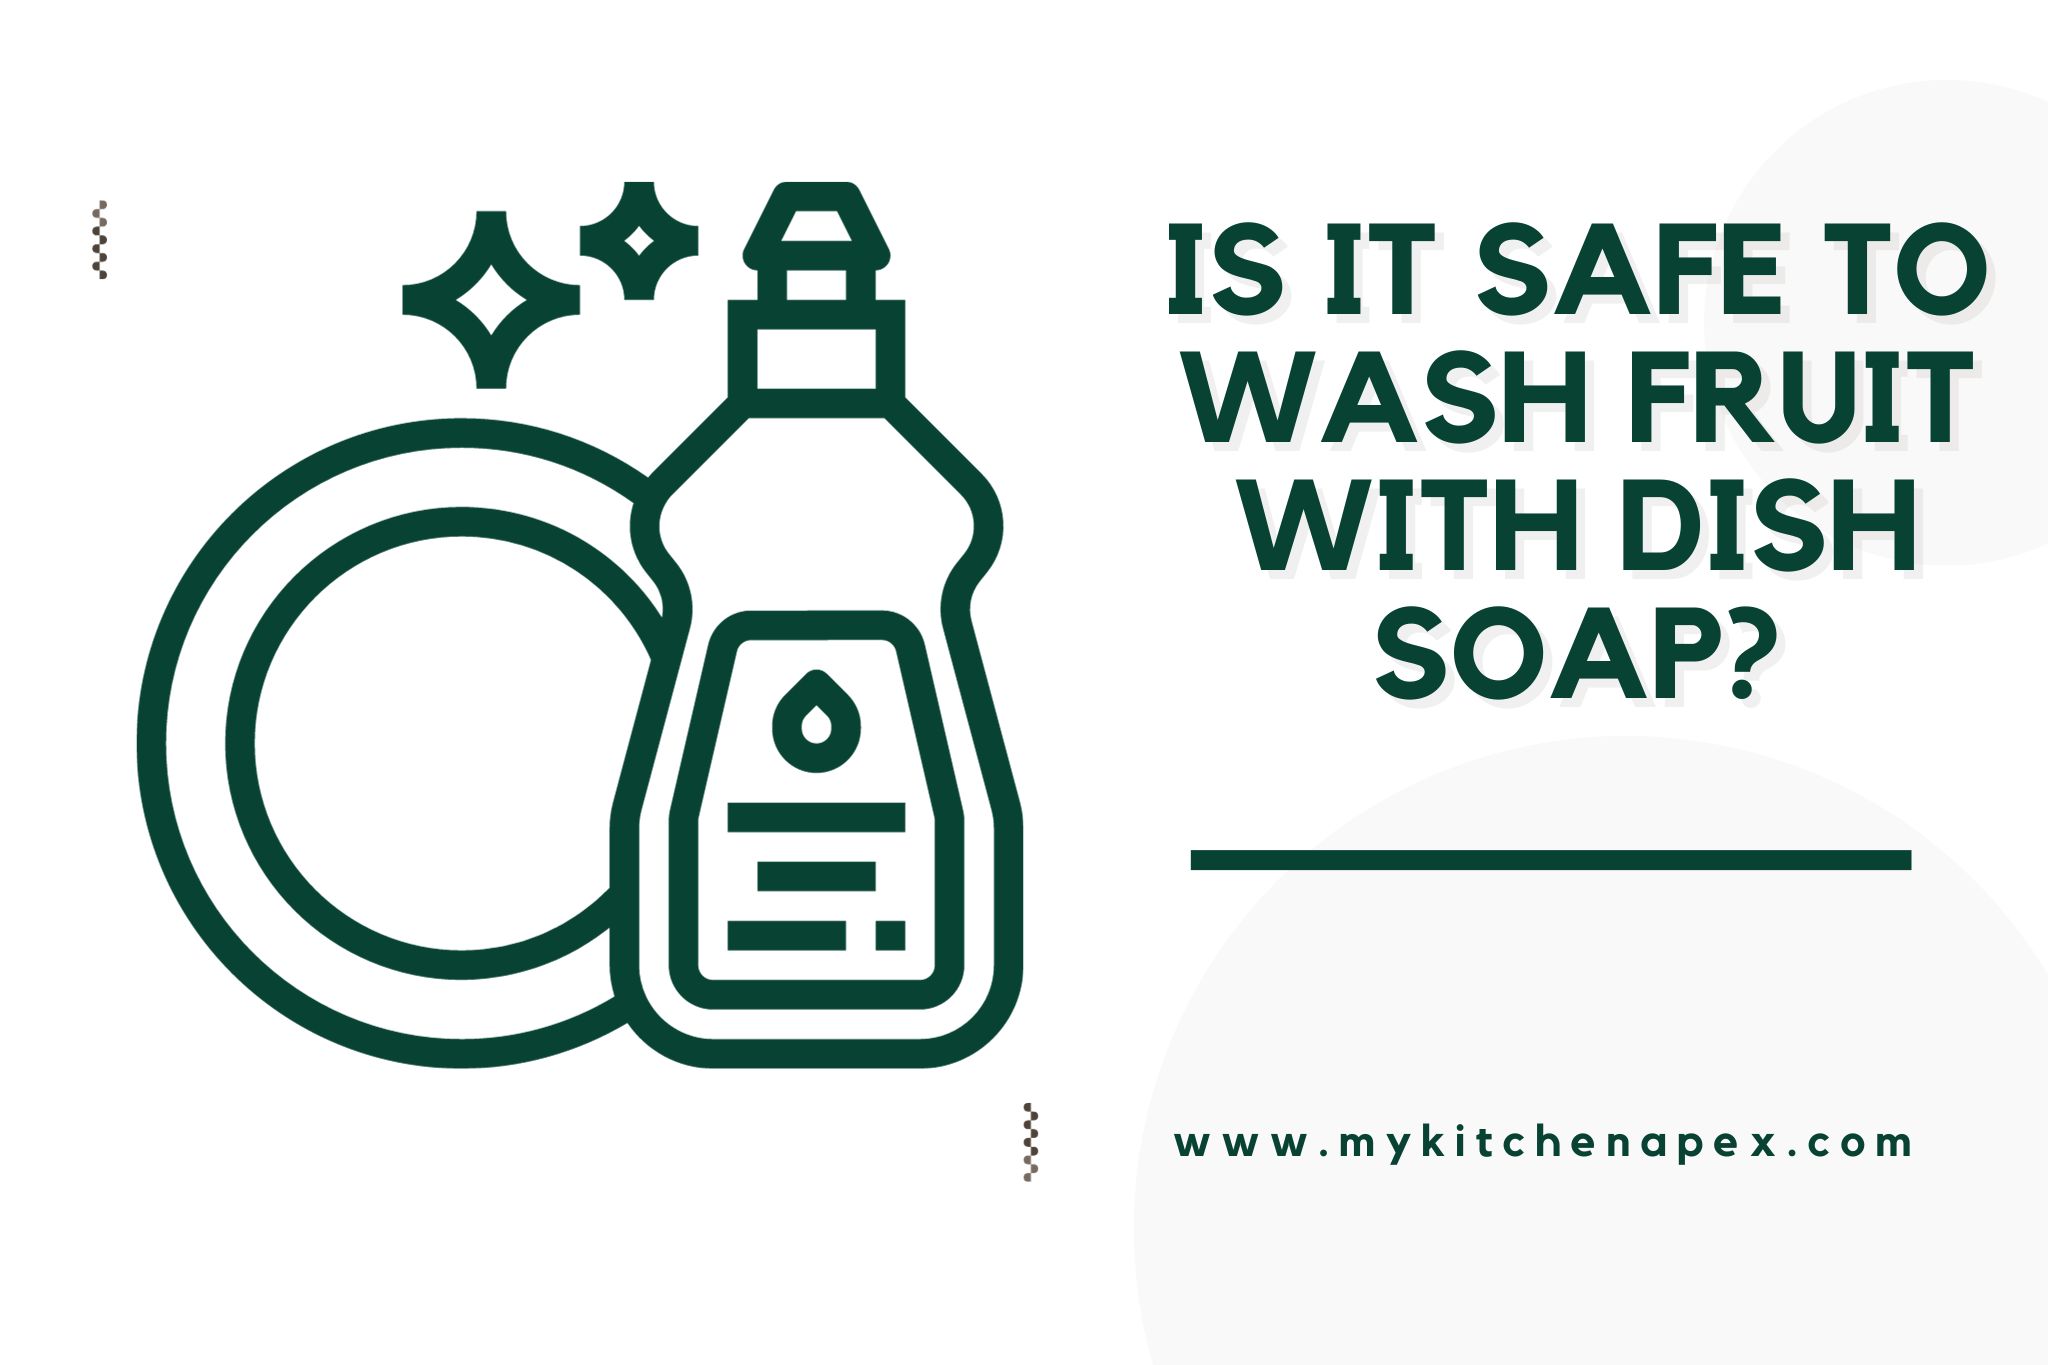 Is it safe to wash fruit with dish soap?